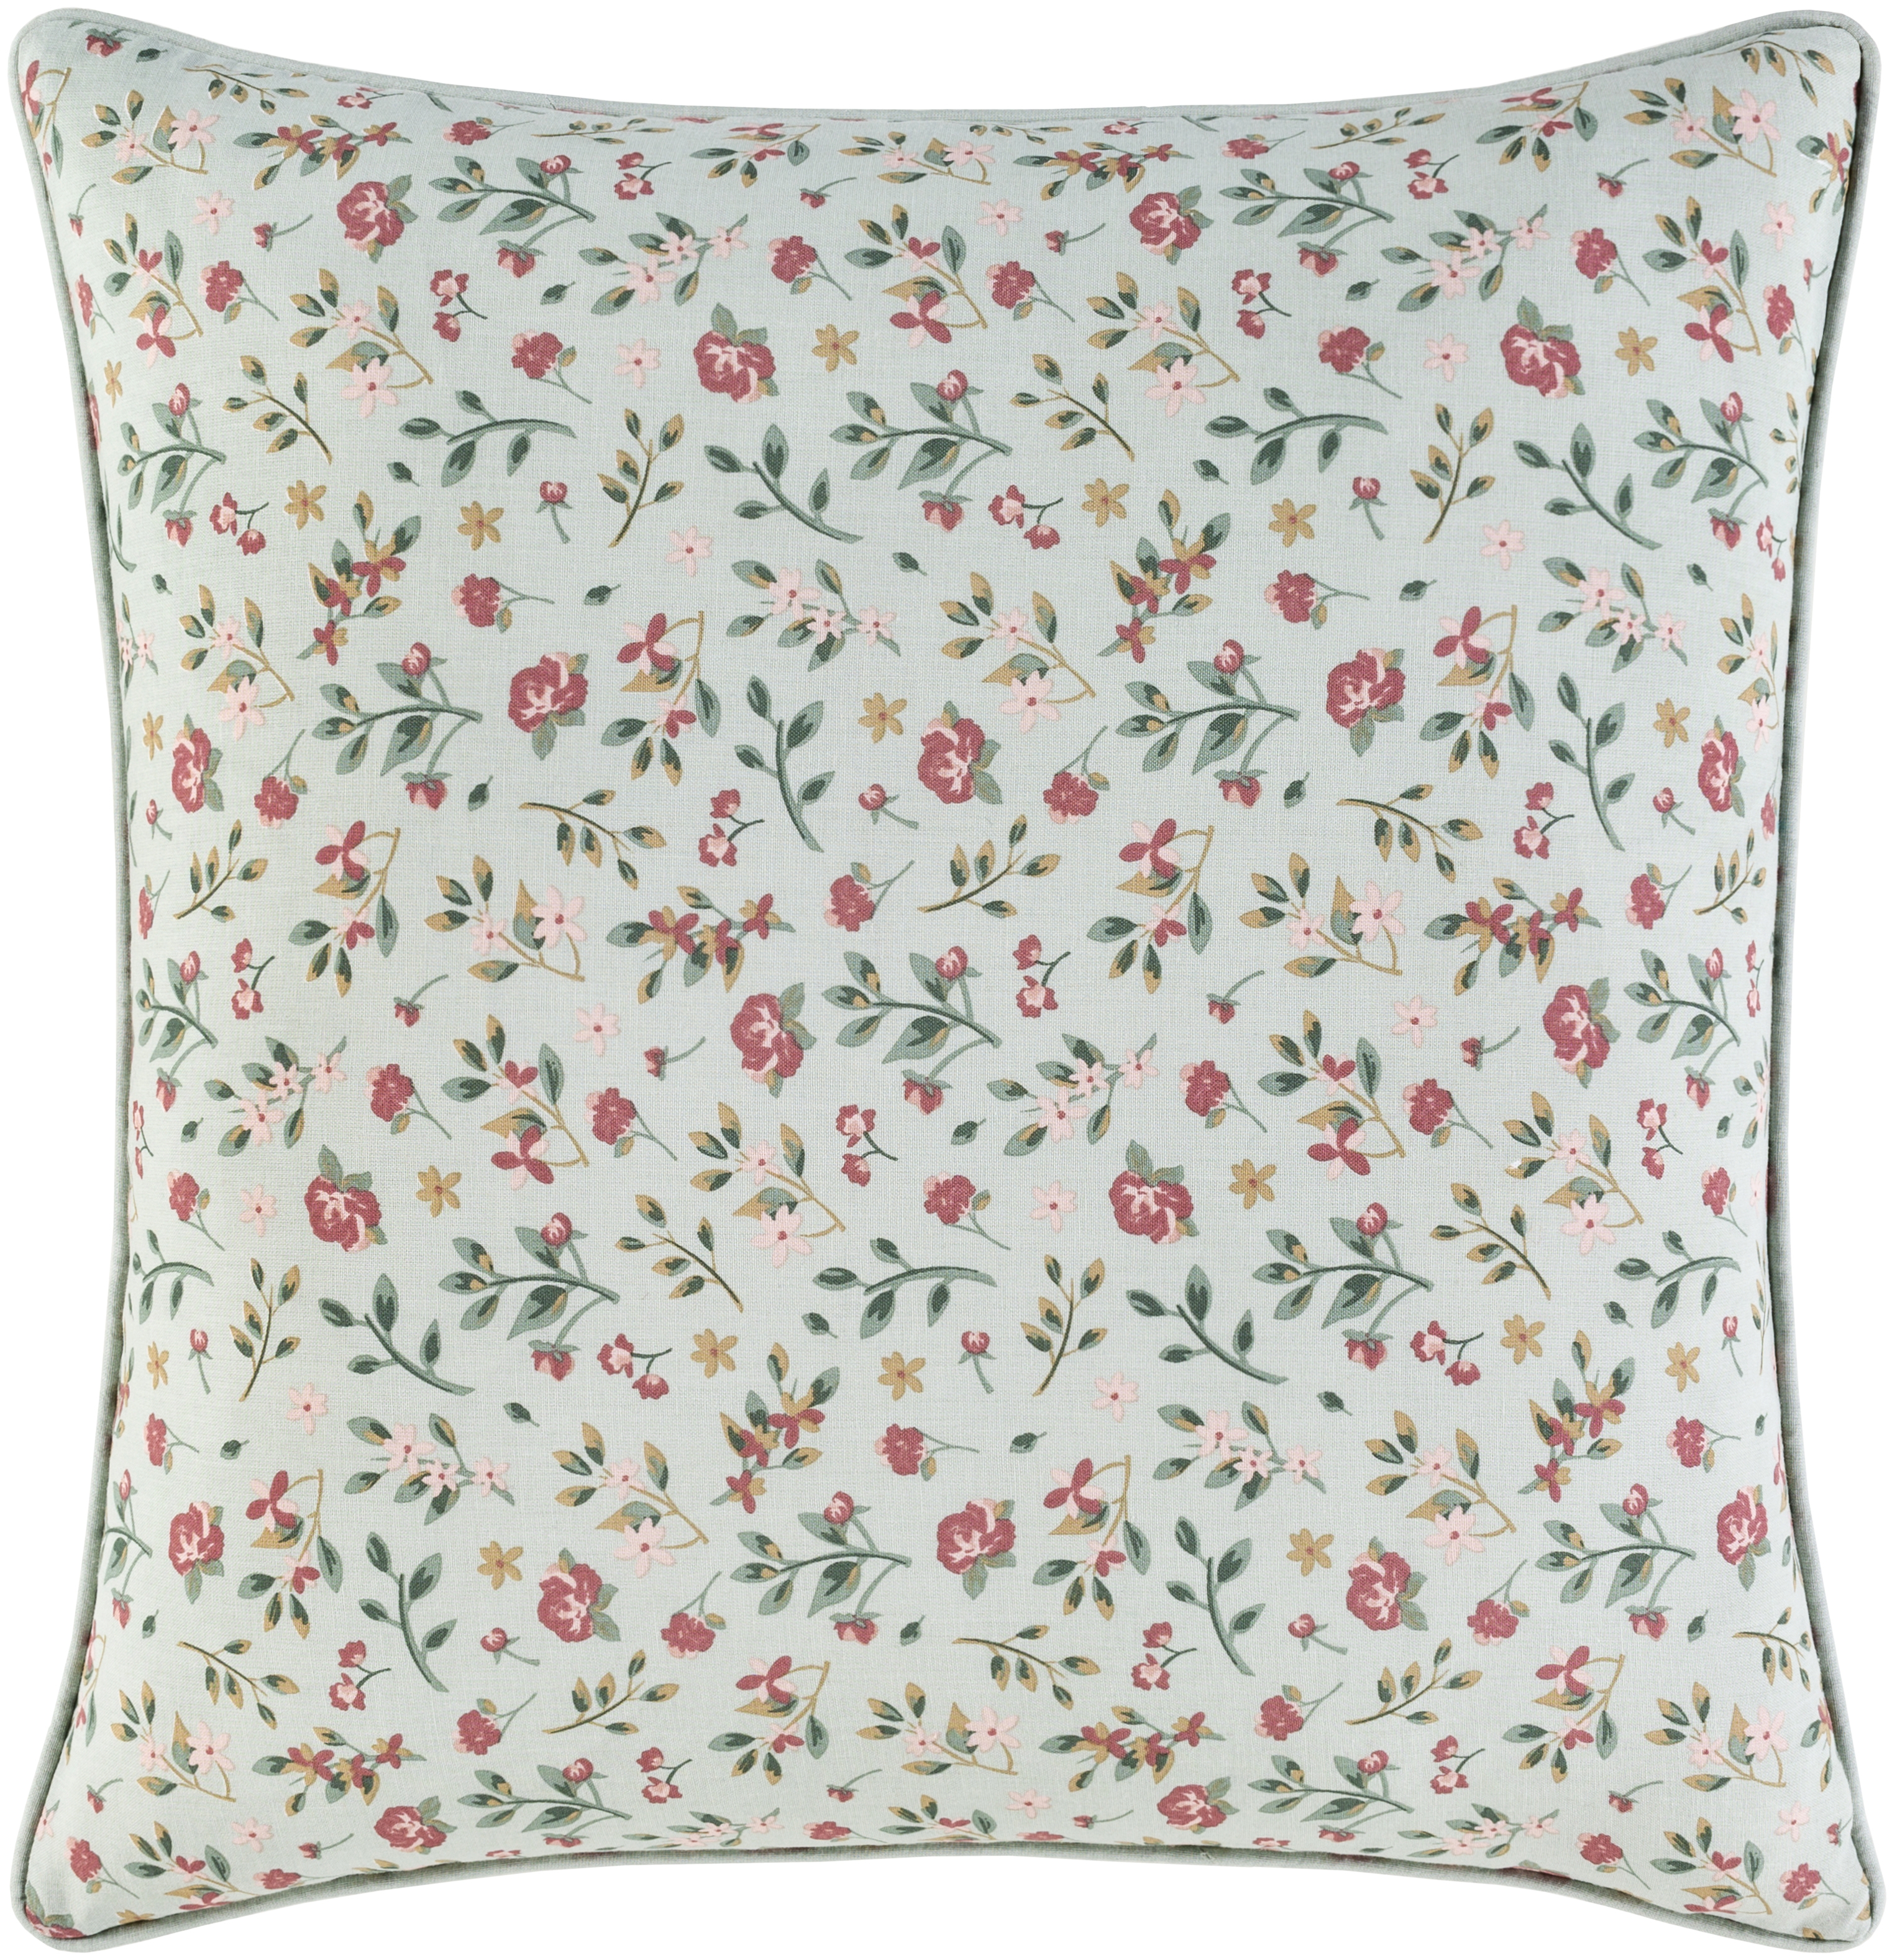 Floret Throw Pillow, 20" x 20", with down insert - Image 0